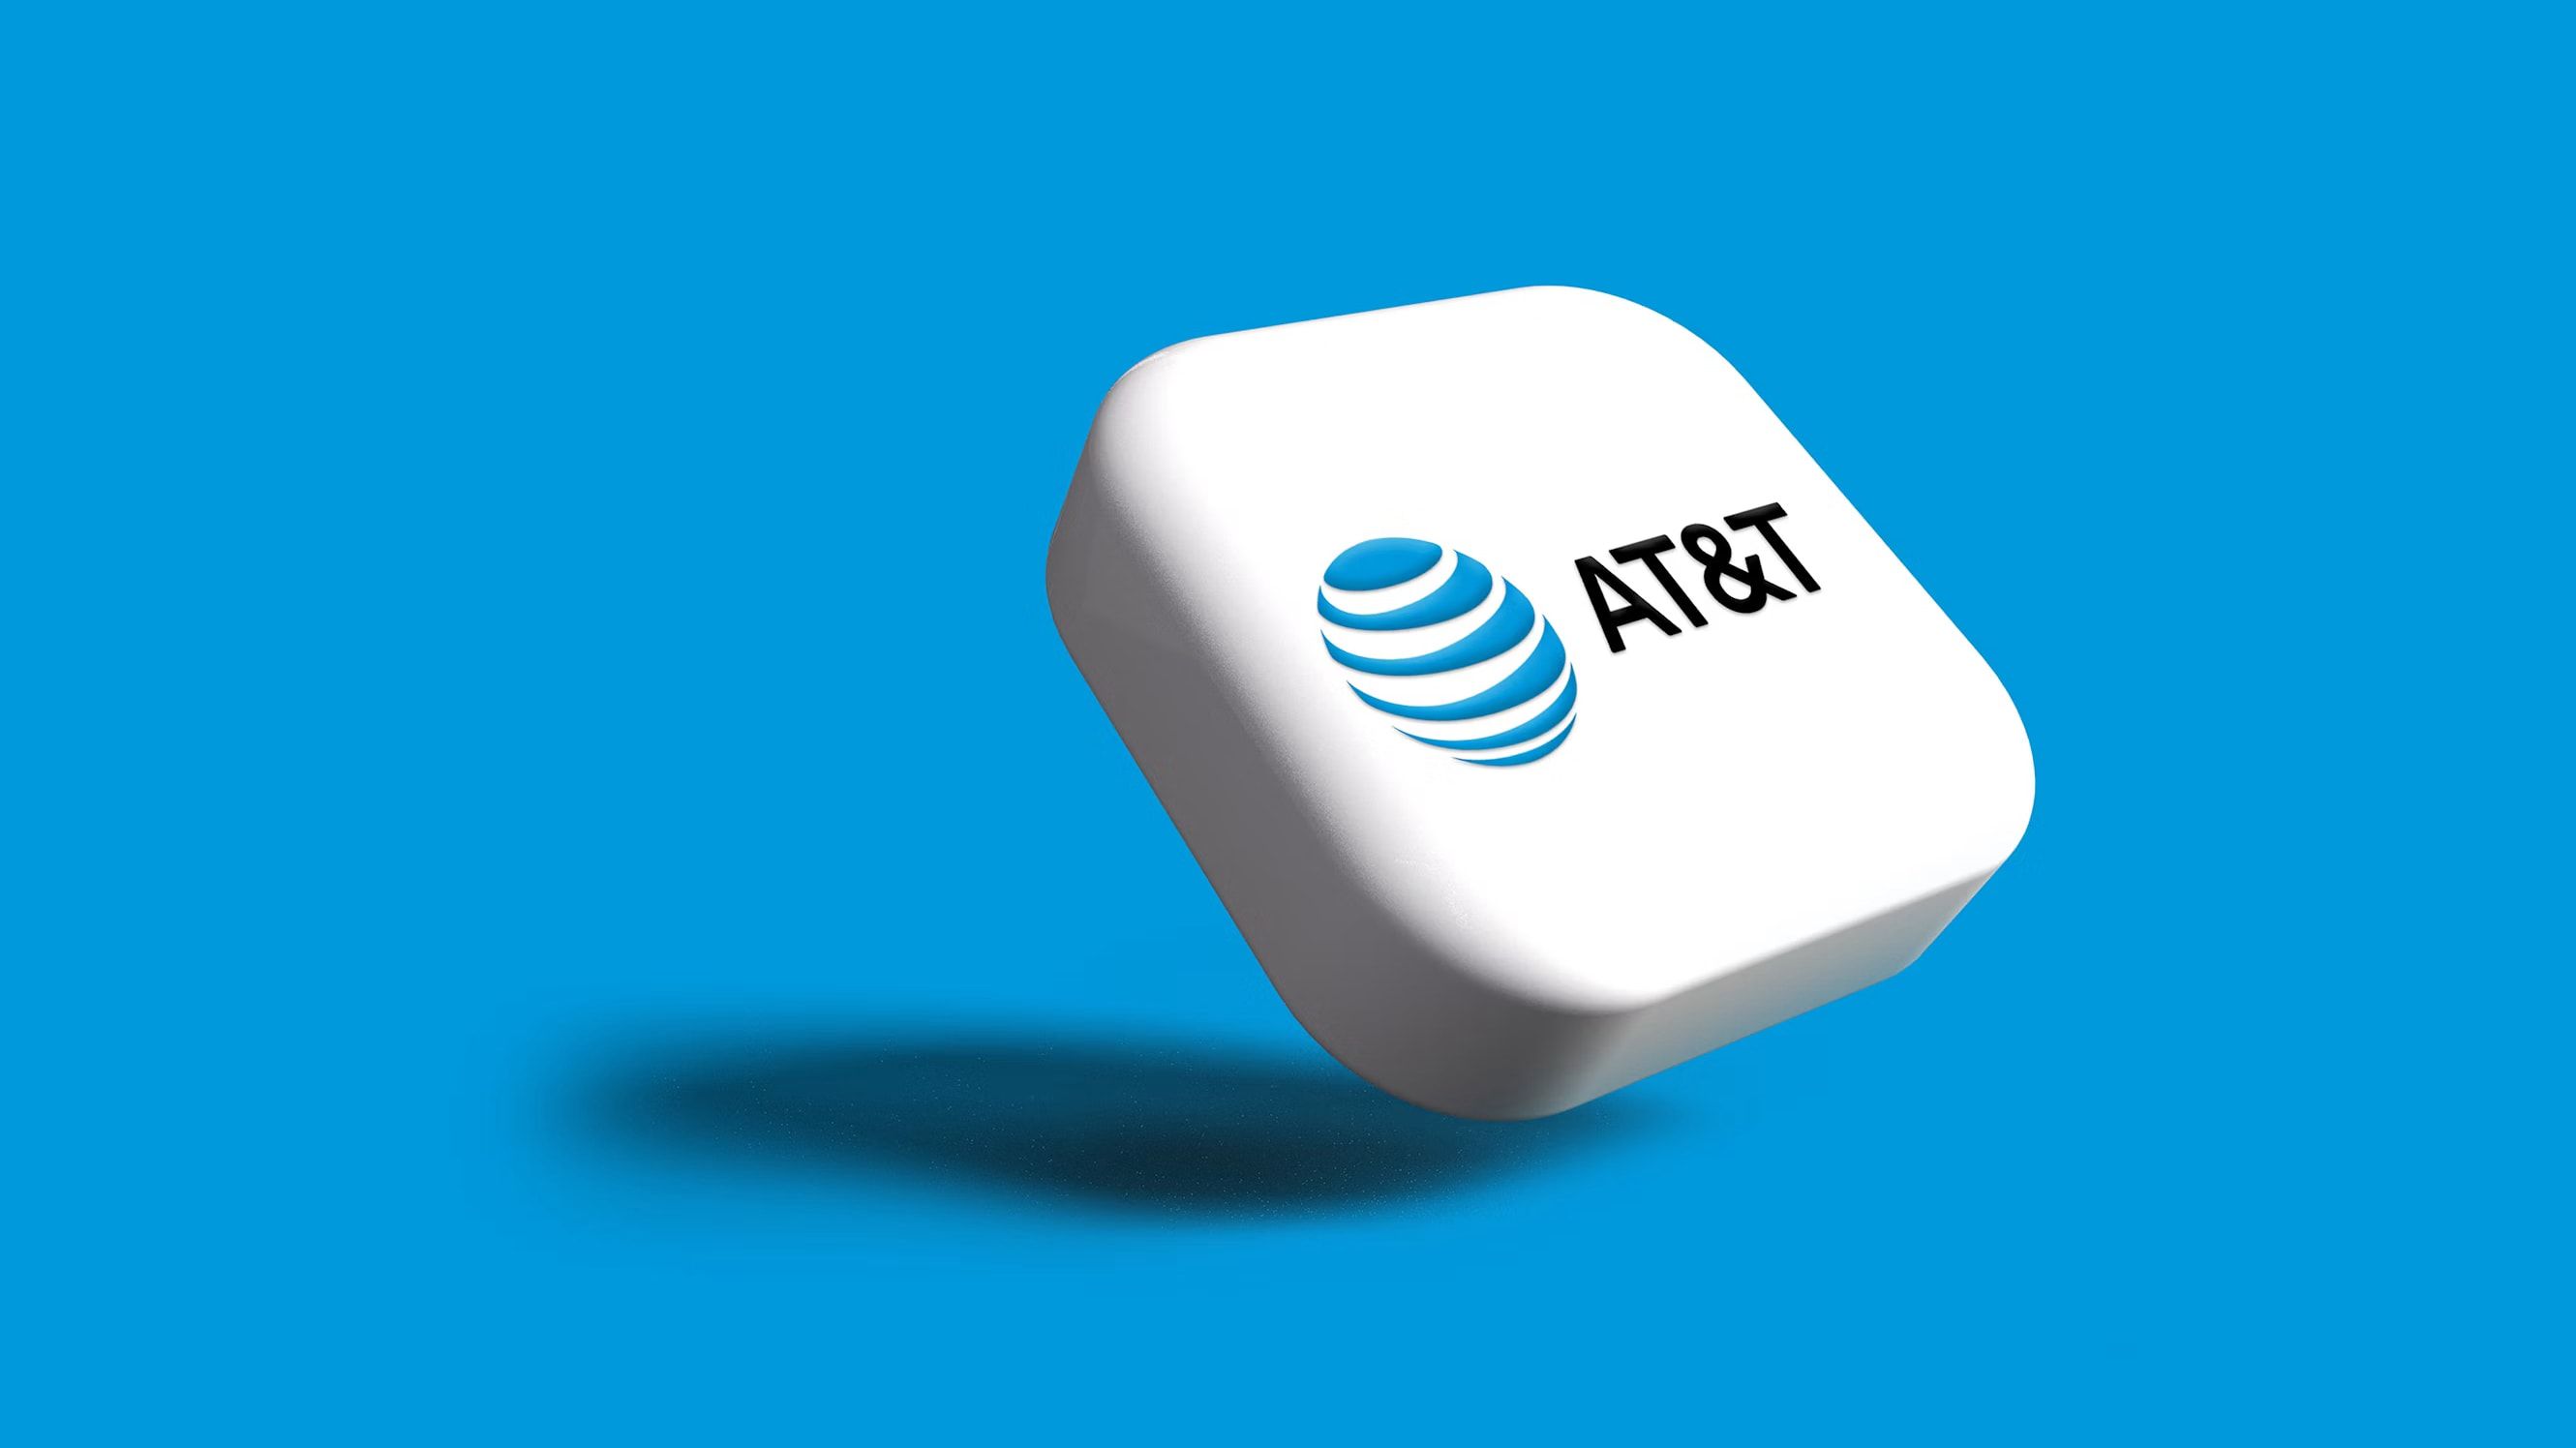 The AT&T logo on a white button against a blue background.